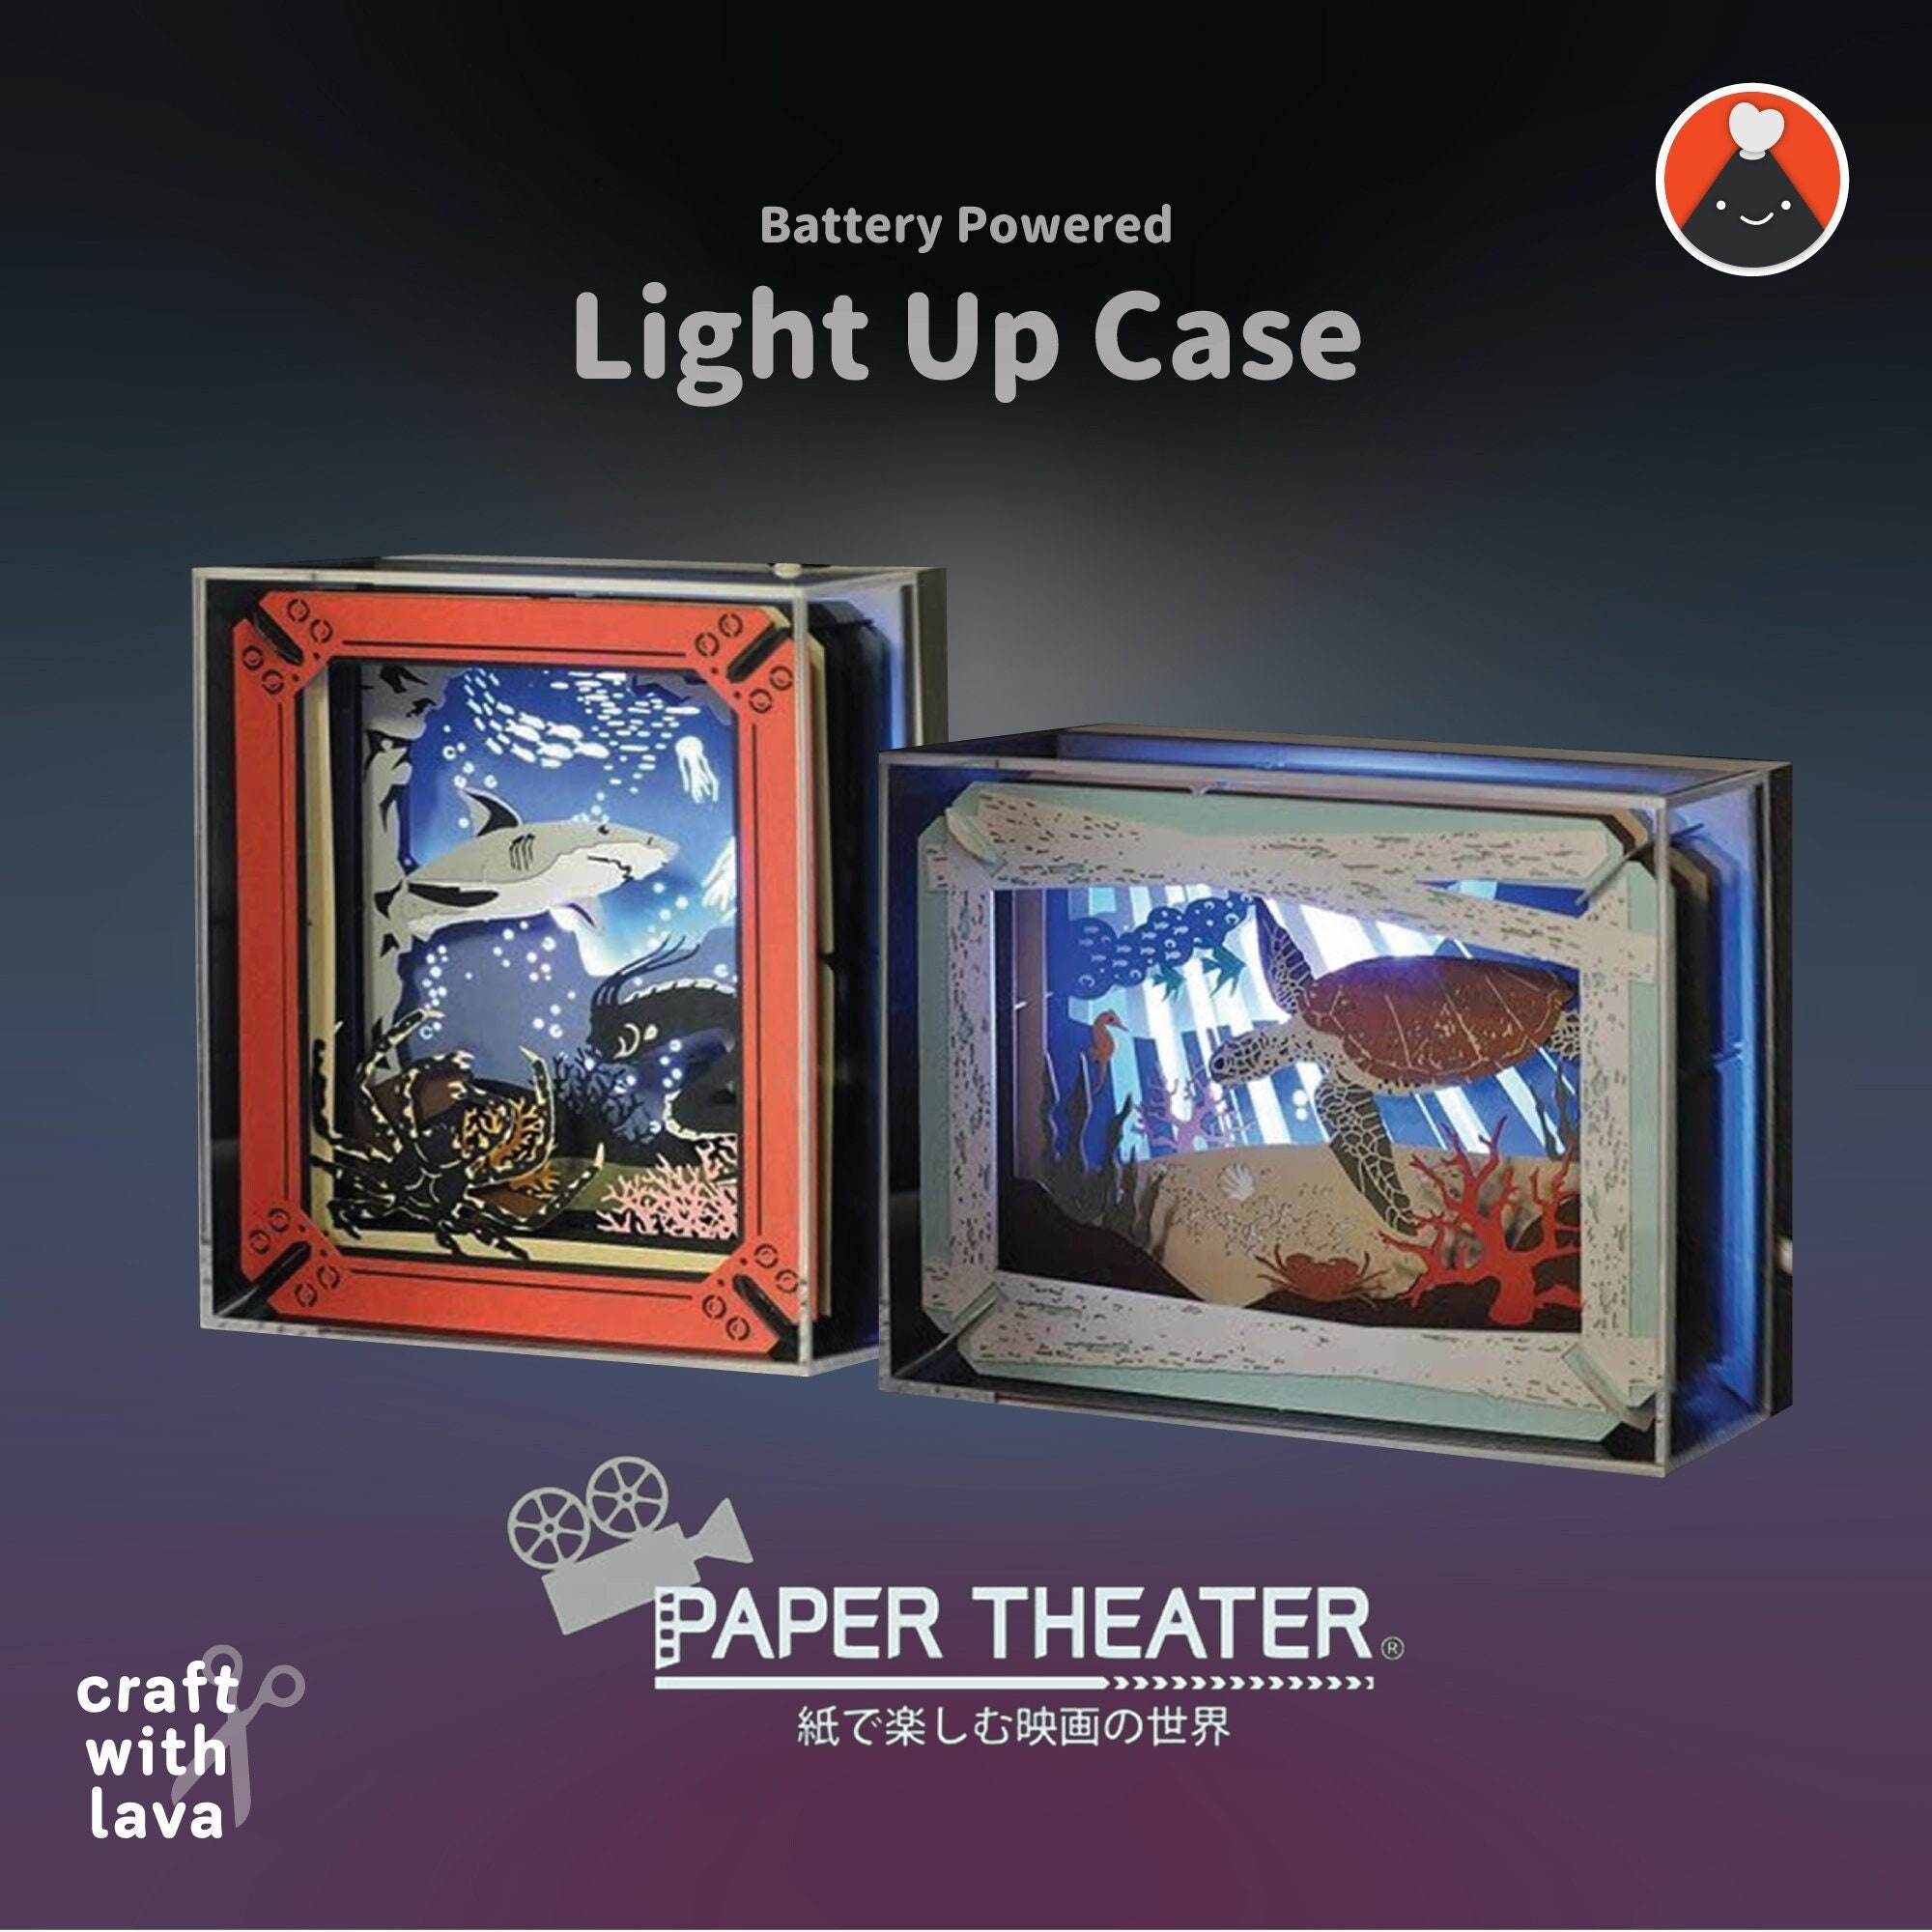 Paper Theater Light up case